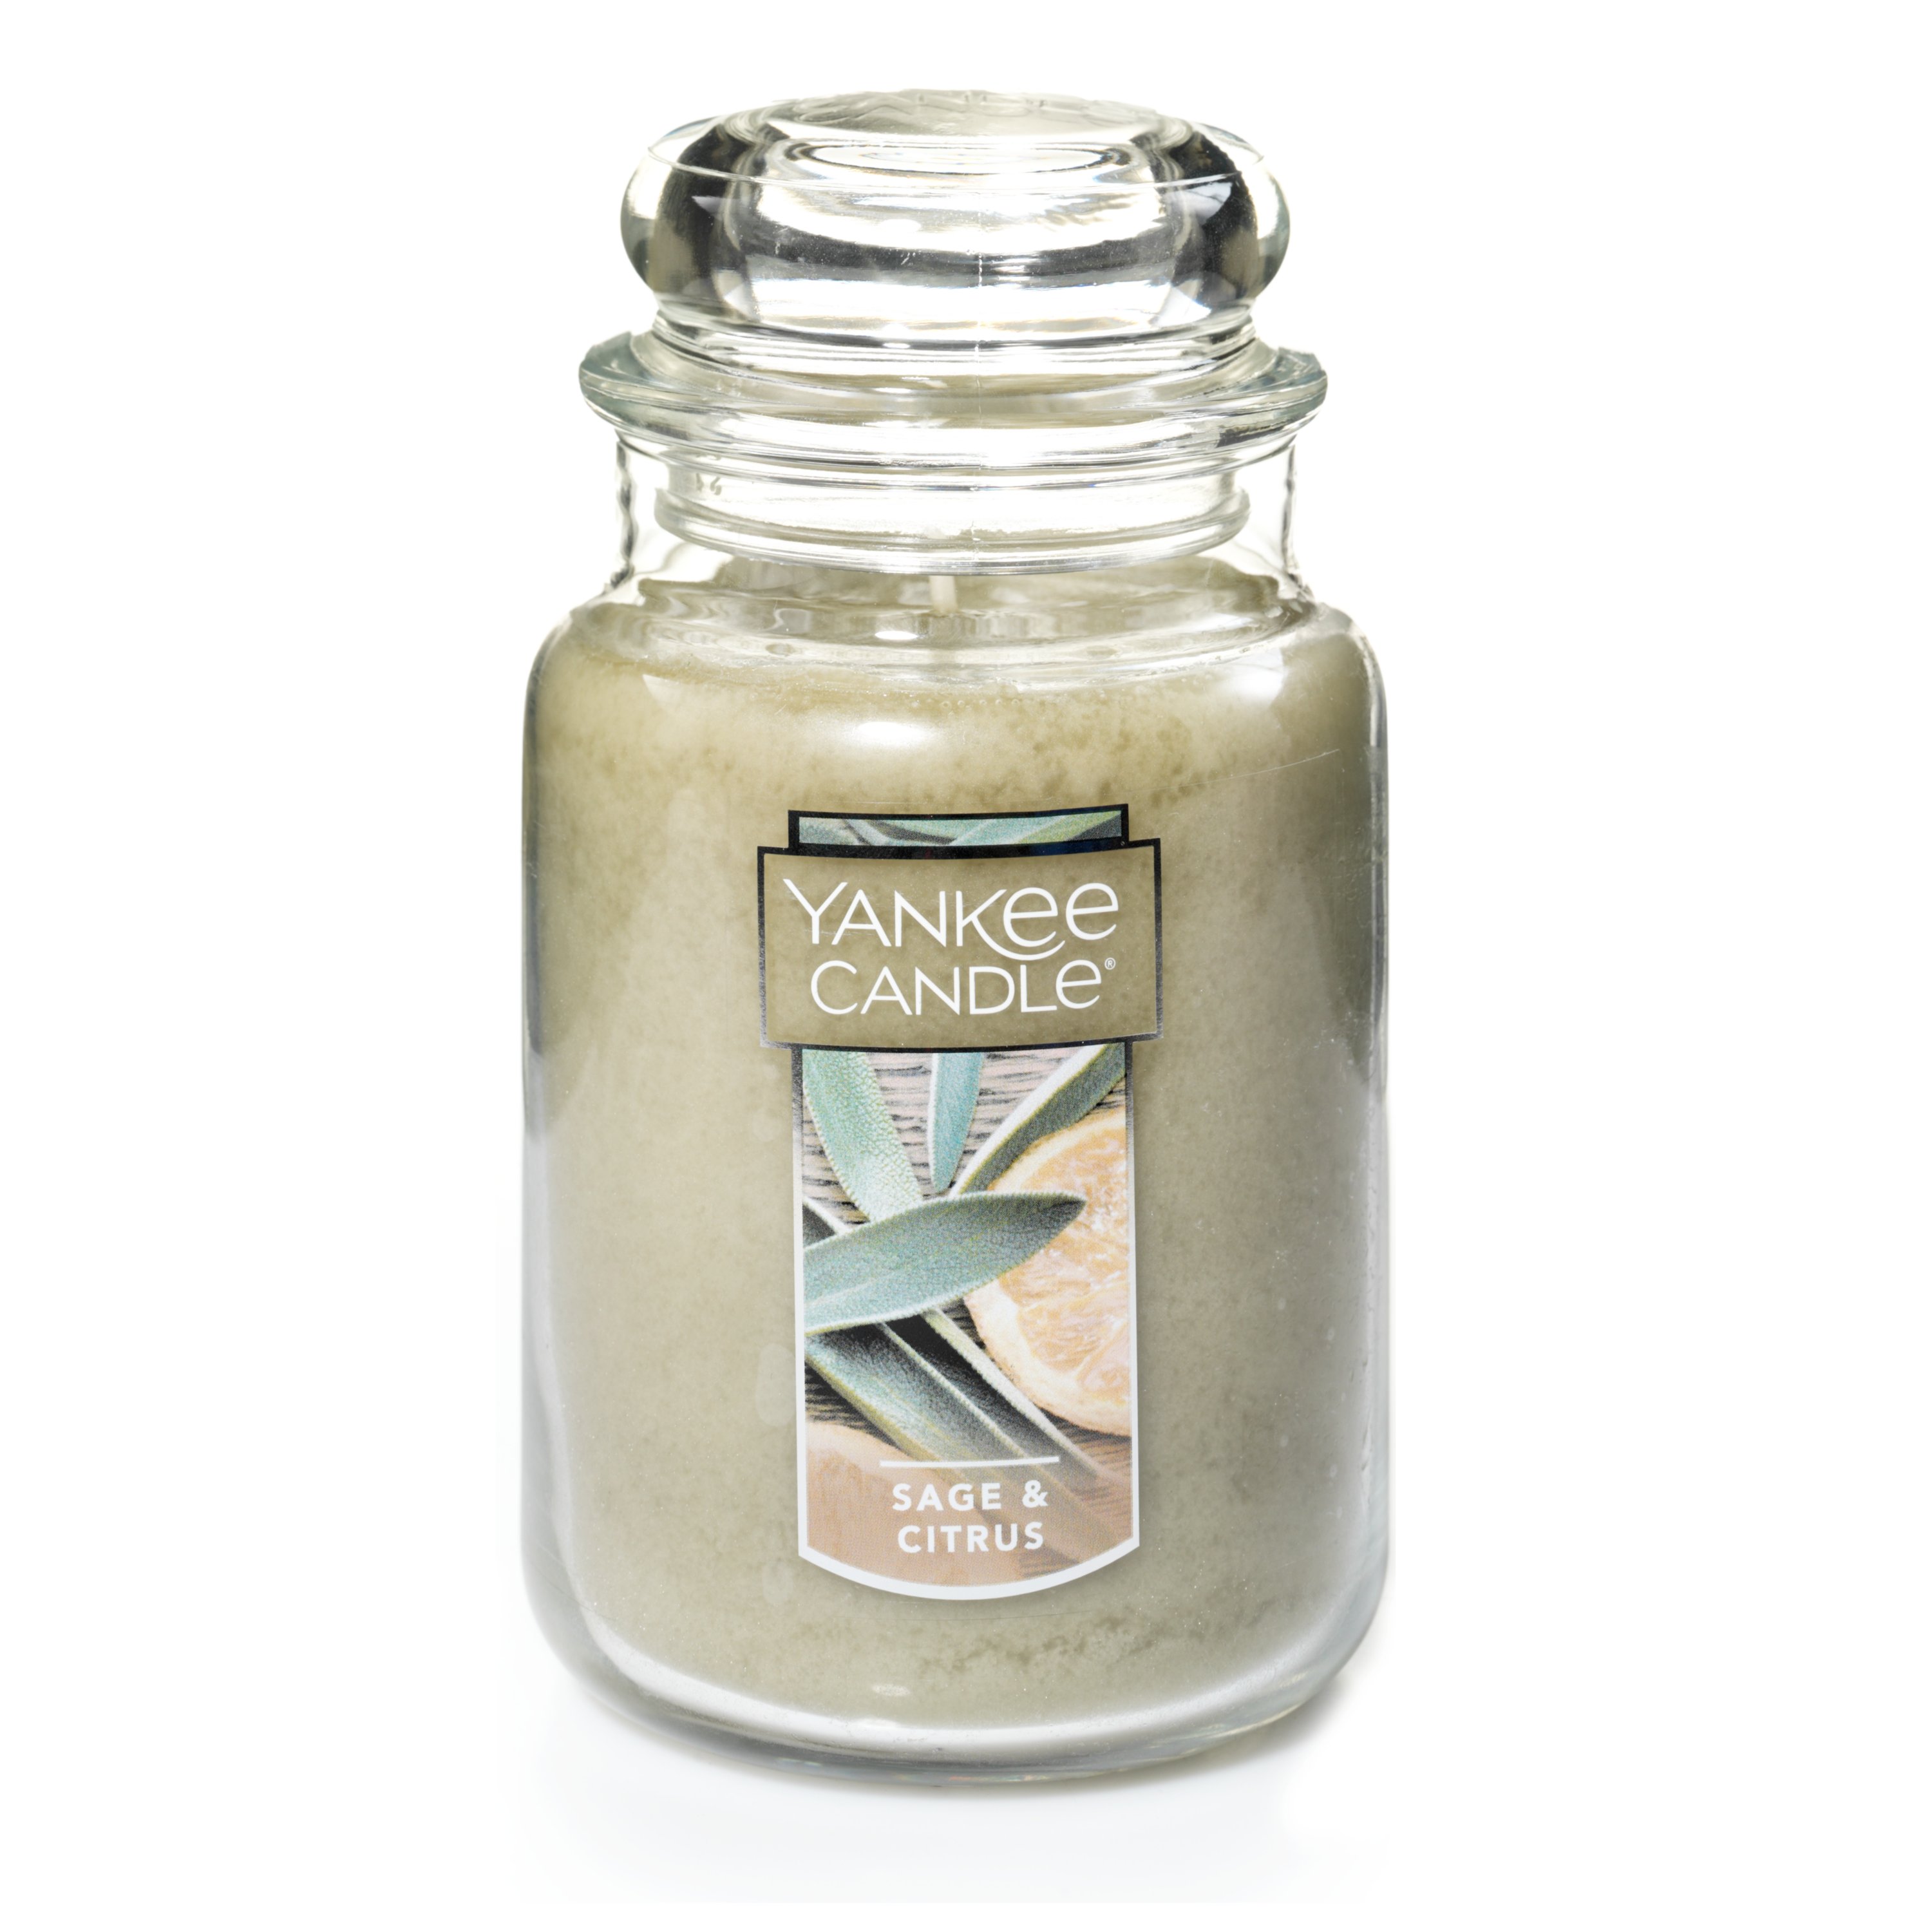 Yankee Candle Candle, Kitchen Spice - 1 candle, 22 oz